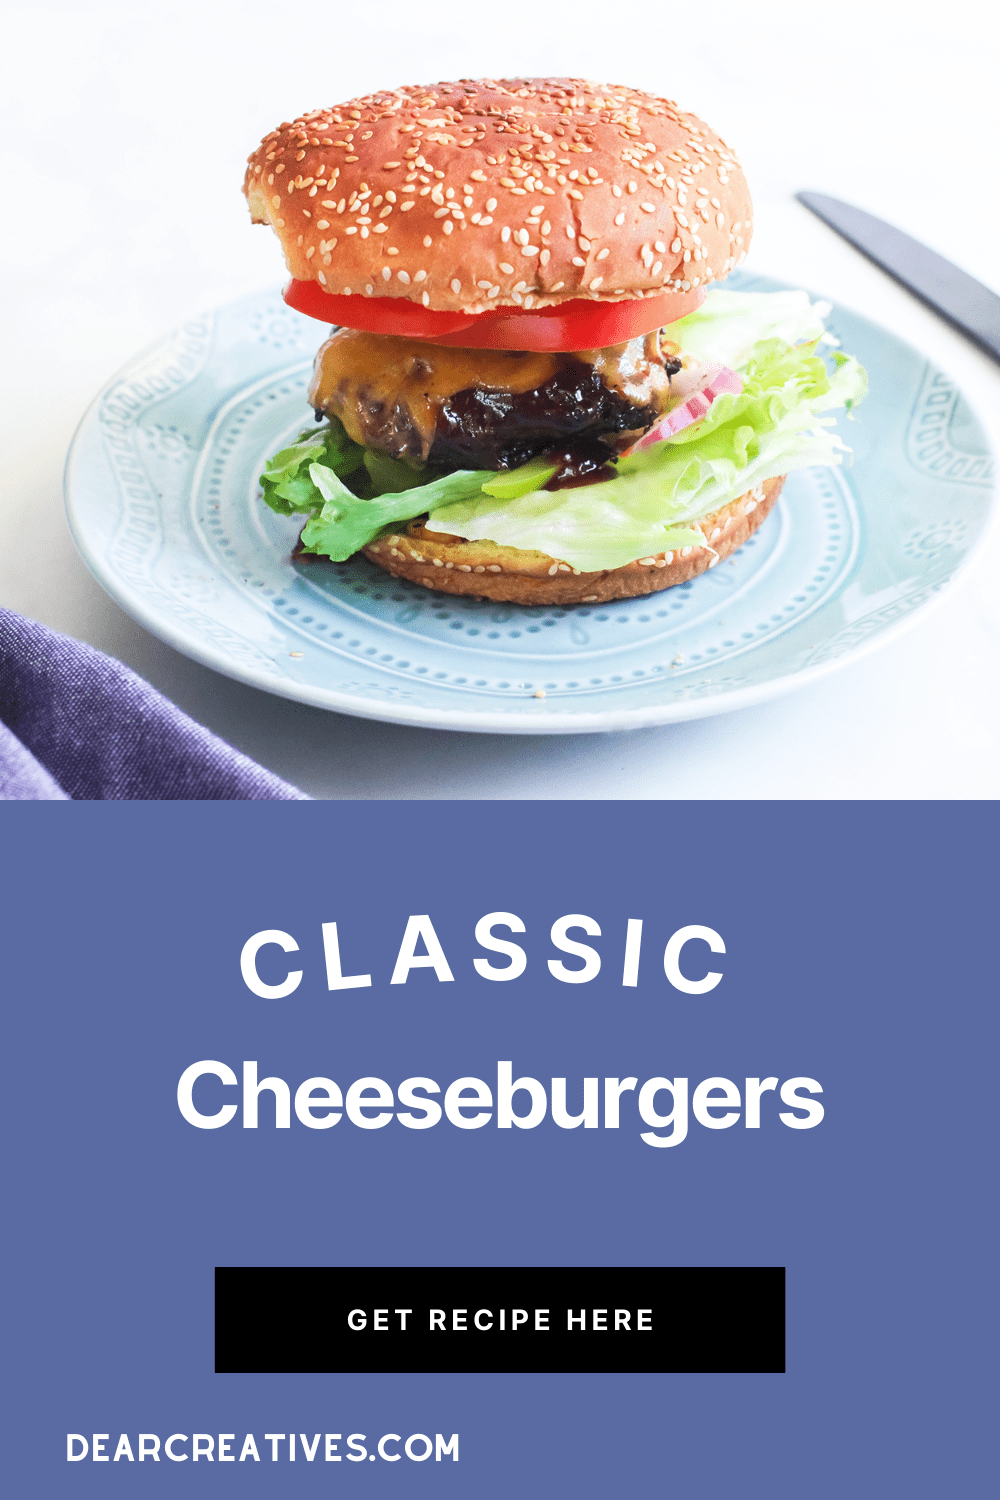 Classic Cheeseburgers - Juicy burgers grilled to perfection with melted cheese and fresh toppings. See how to grill a cheeseburger - DearCreatives.com